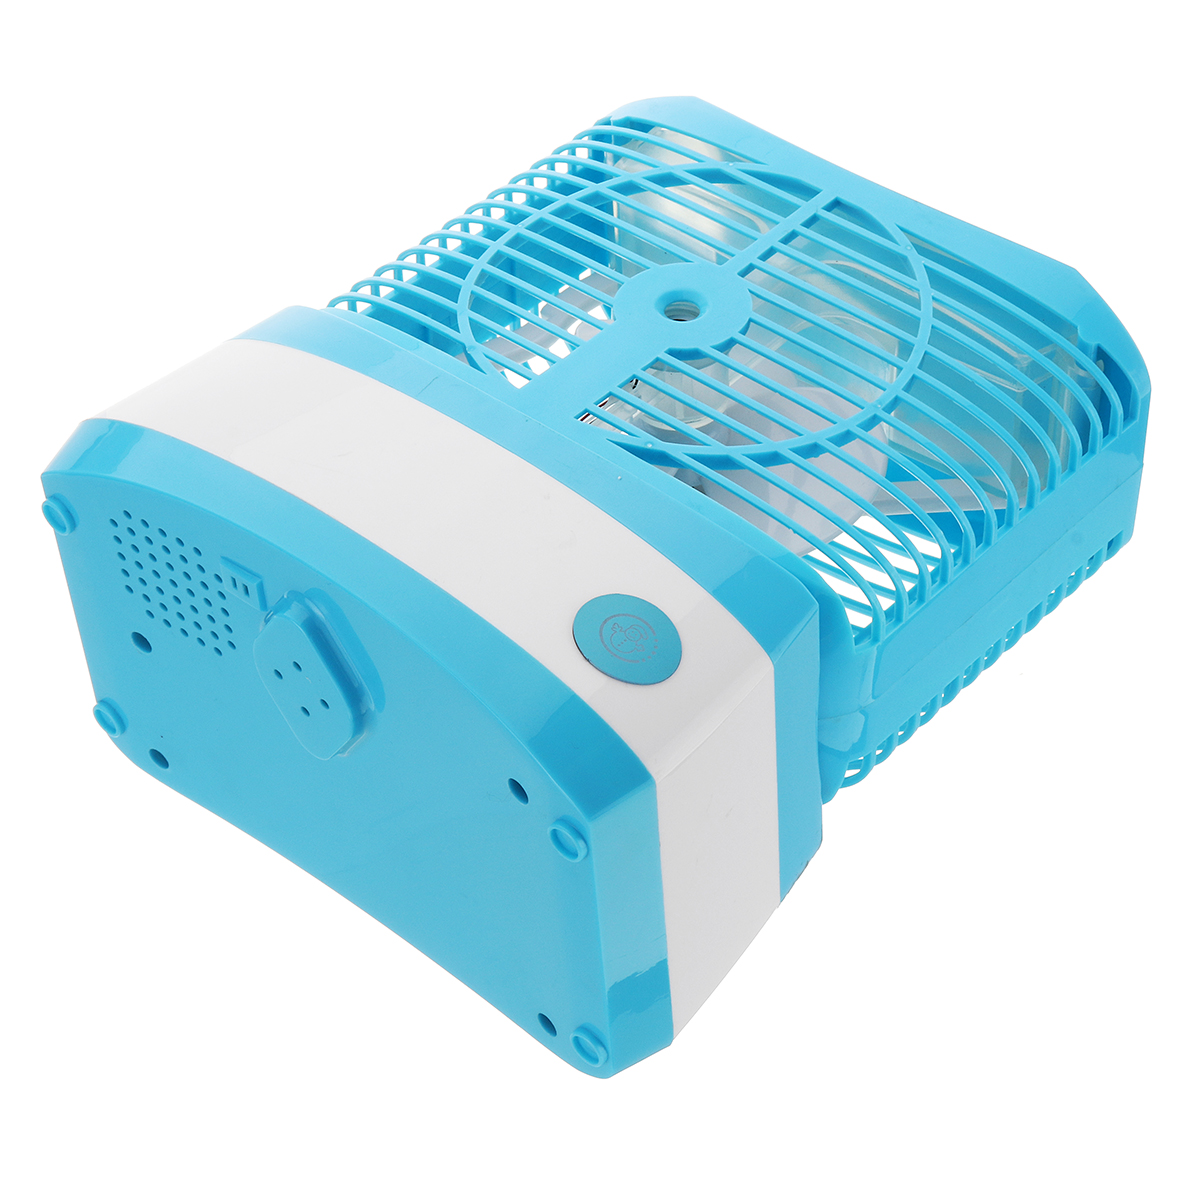 USB-Portable-Mini-ABS-Fan-Cooling-Desktop-Air-Conditioner-Fan-Humidified-Foggy-1419352-9